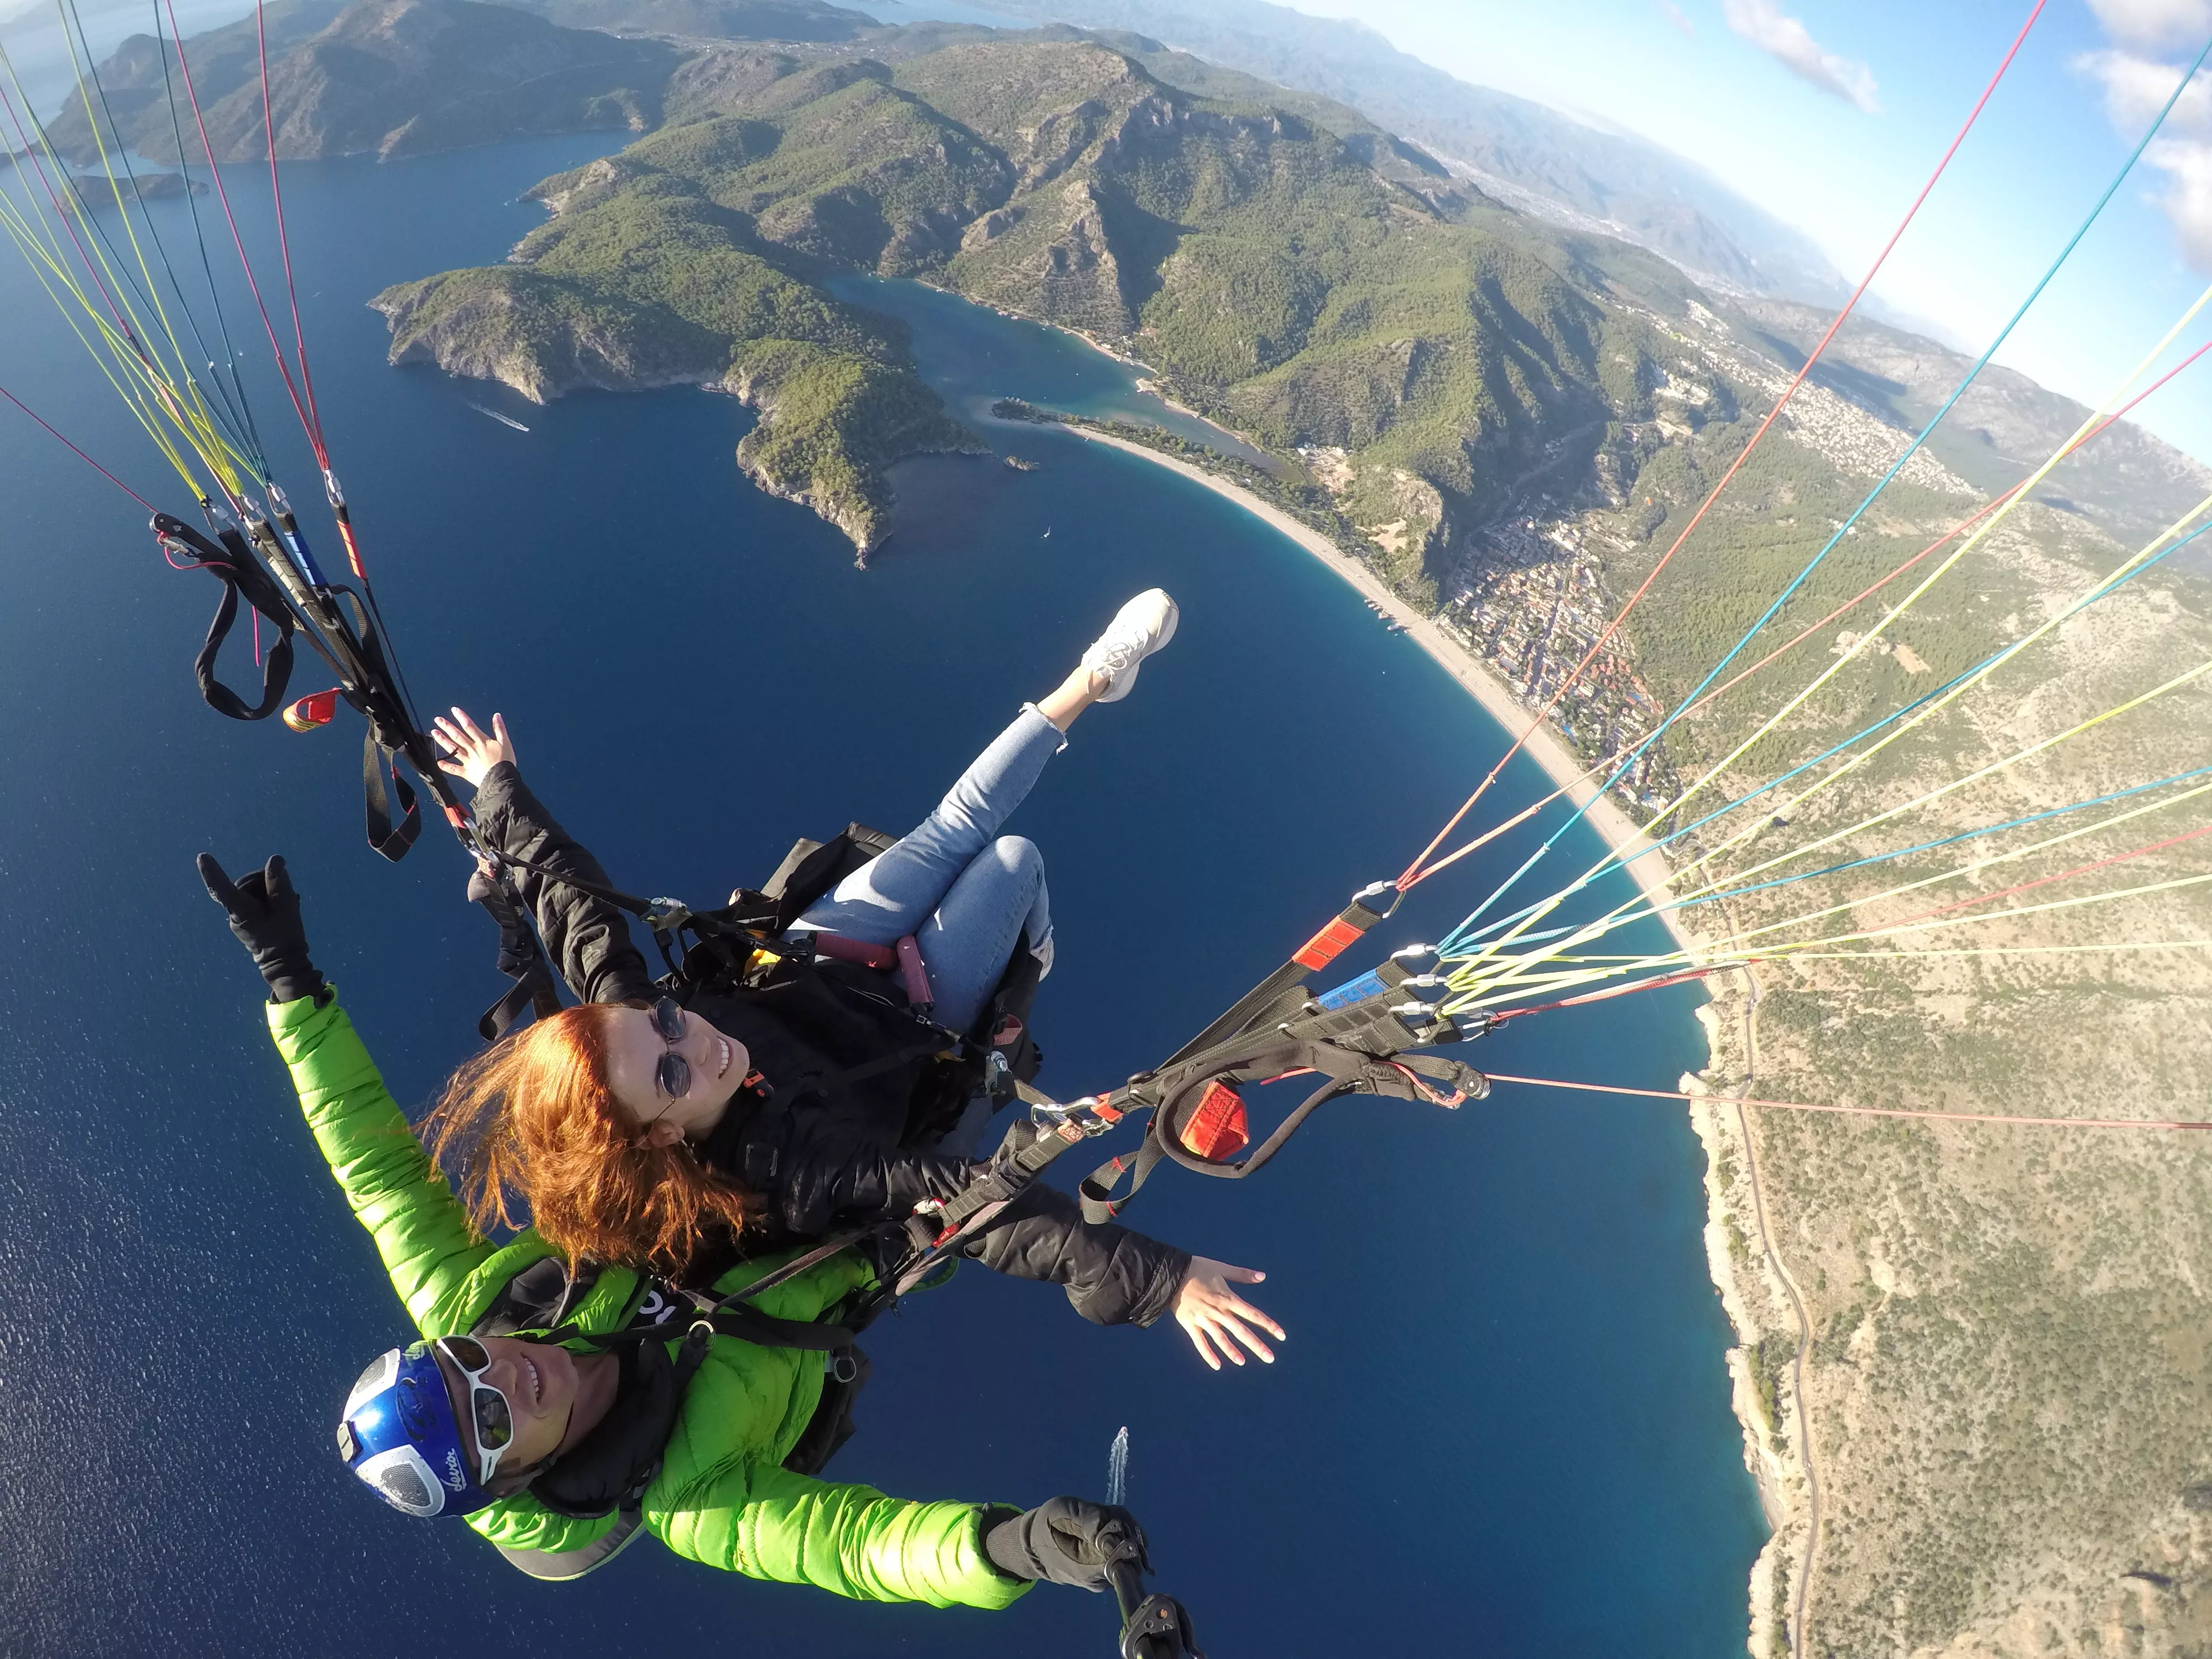 Oludeniz Paragliding in Turkey, Central Asia | Paragliding - Rated 0.8